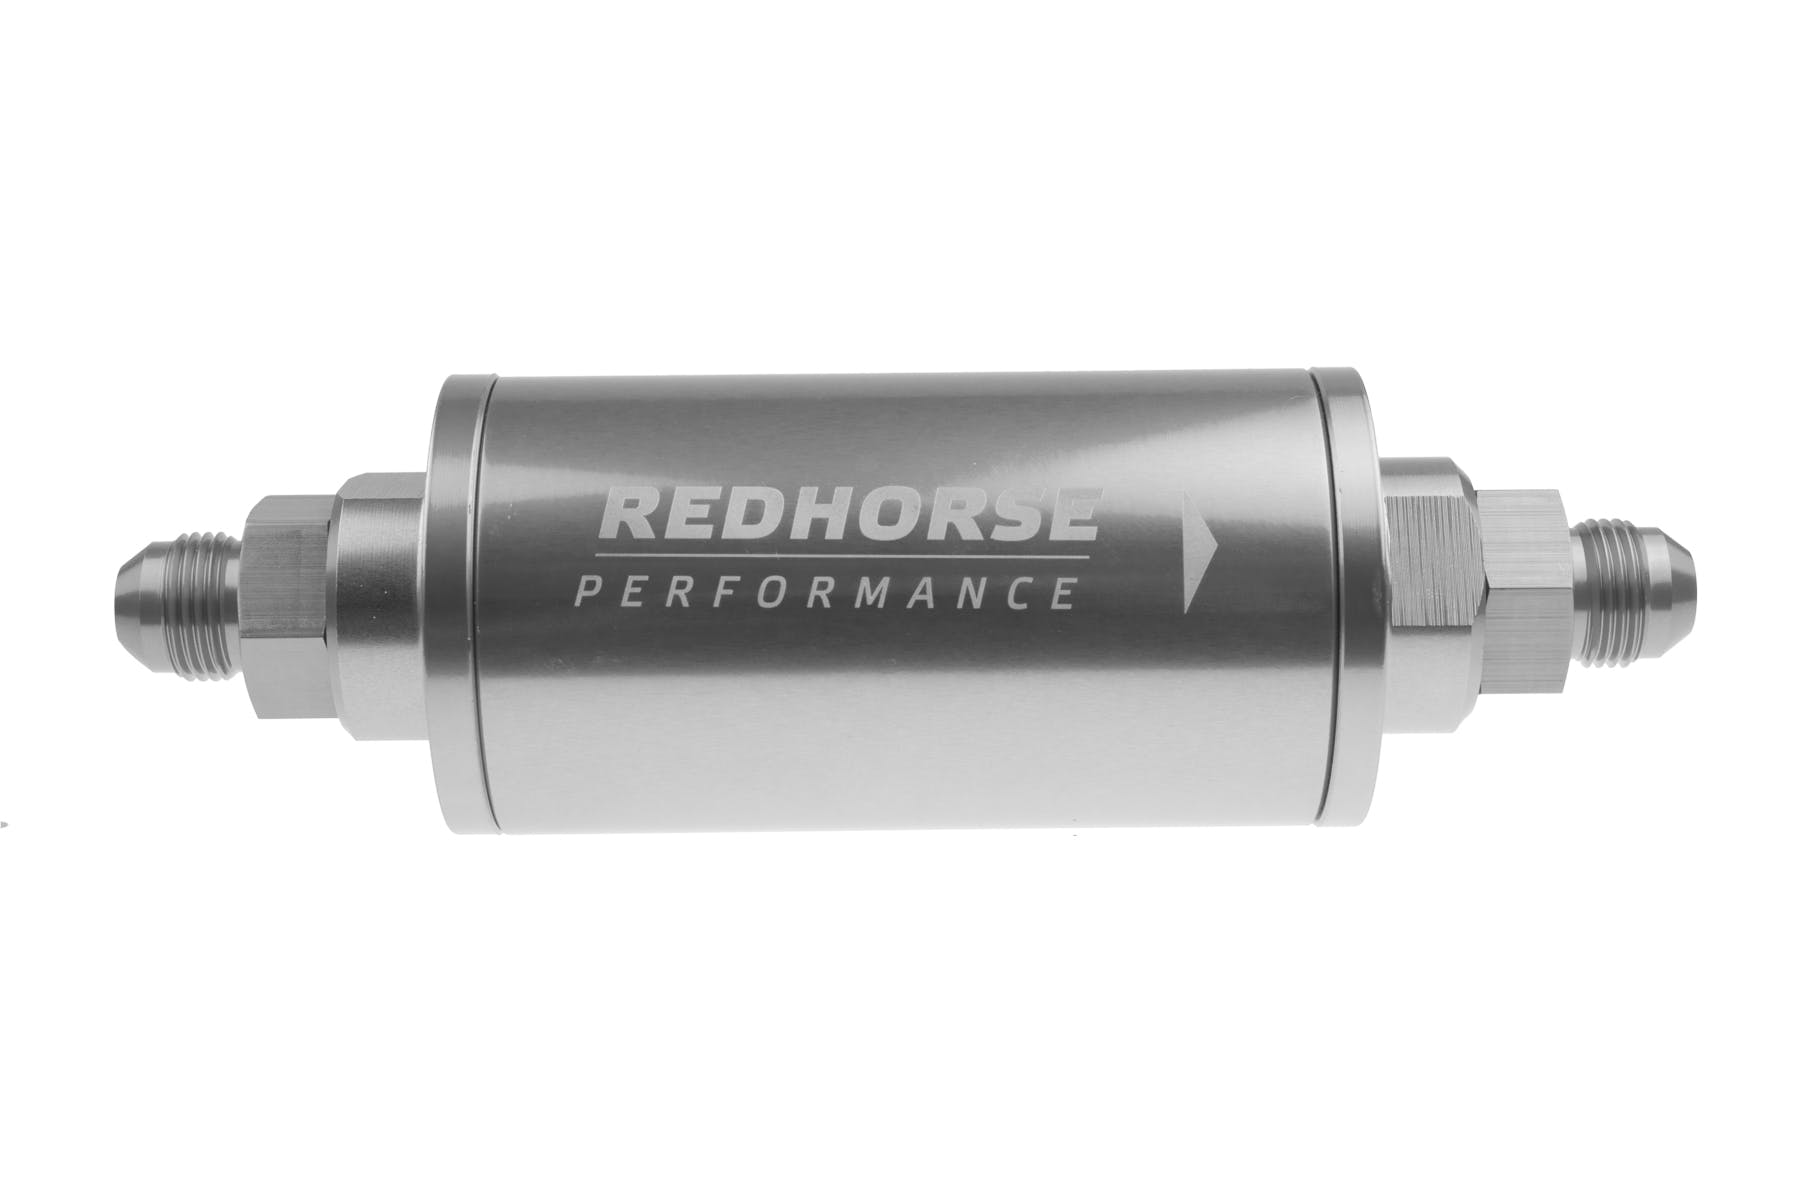 Redhorse Performance 4651-08-5 6in Cylindrical In-Line Race Fuel Filter - 08 AN